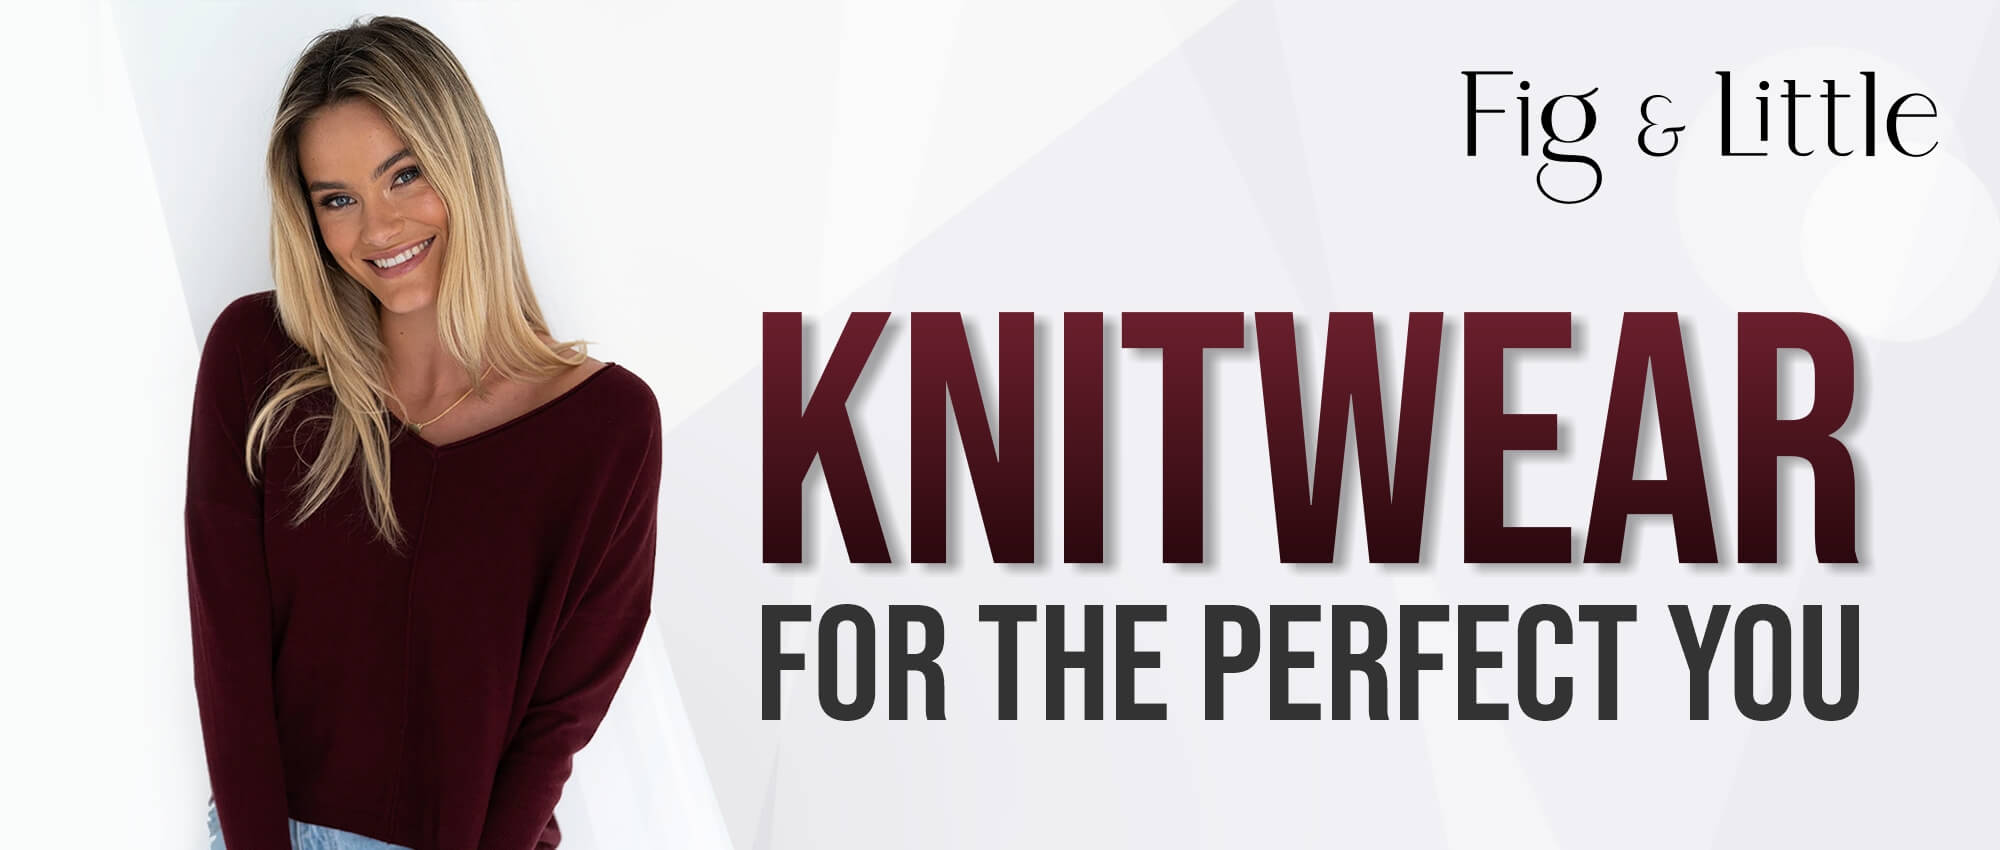 KNITWEAR FOR THE PERFECT YOU